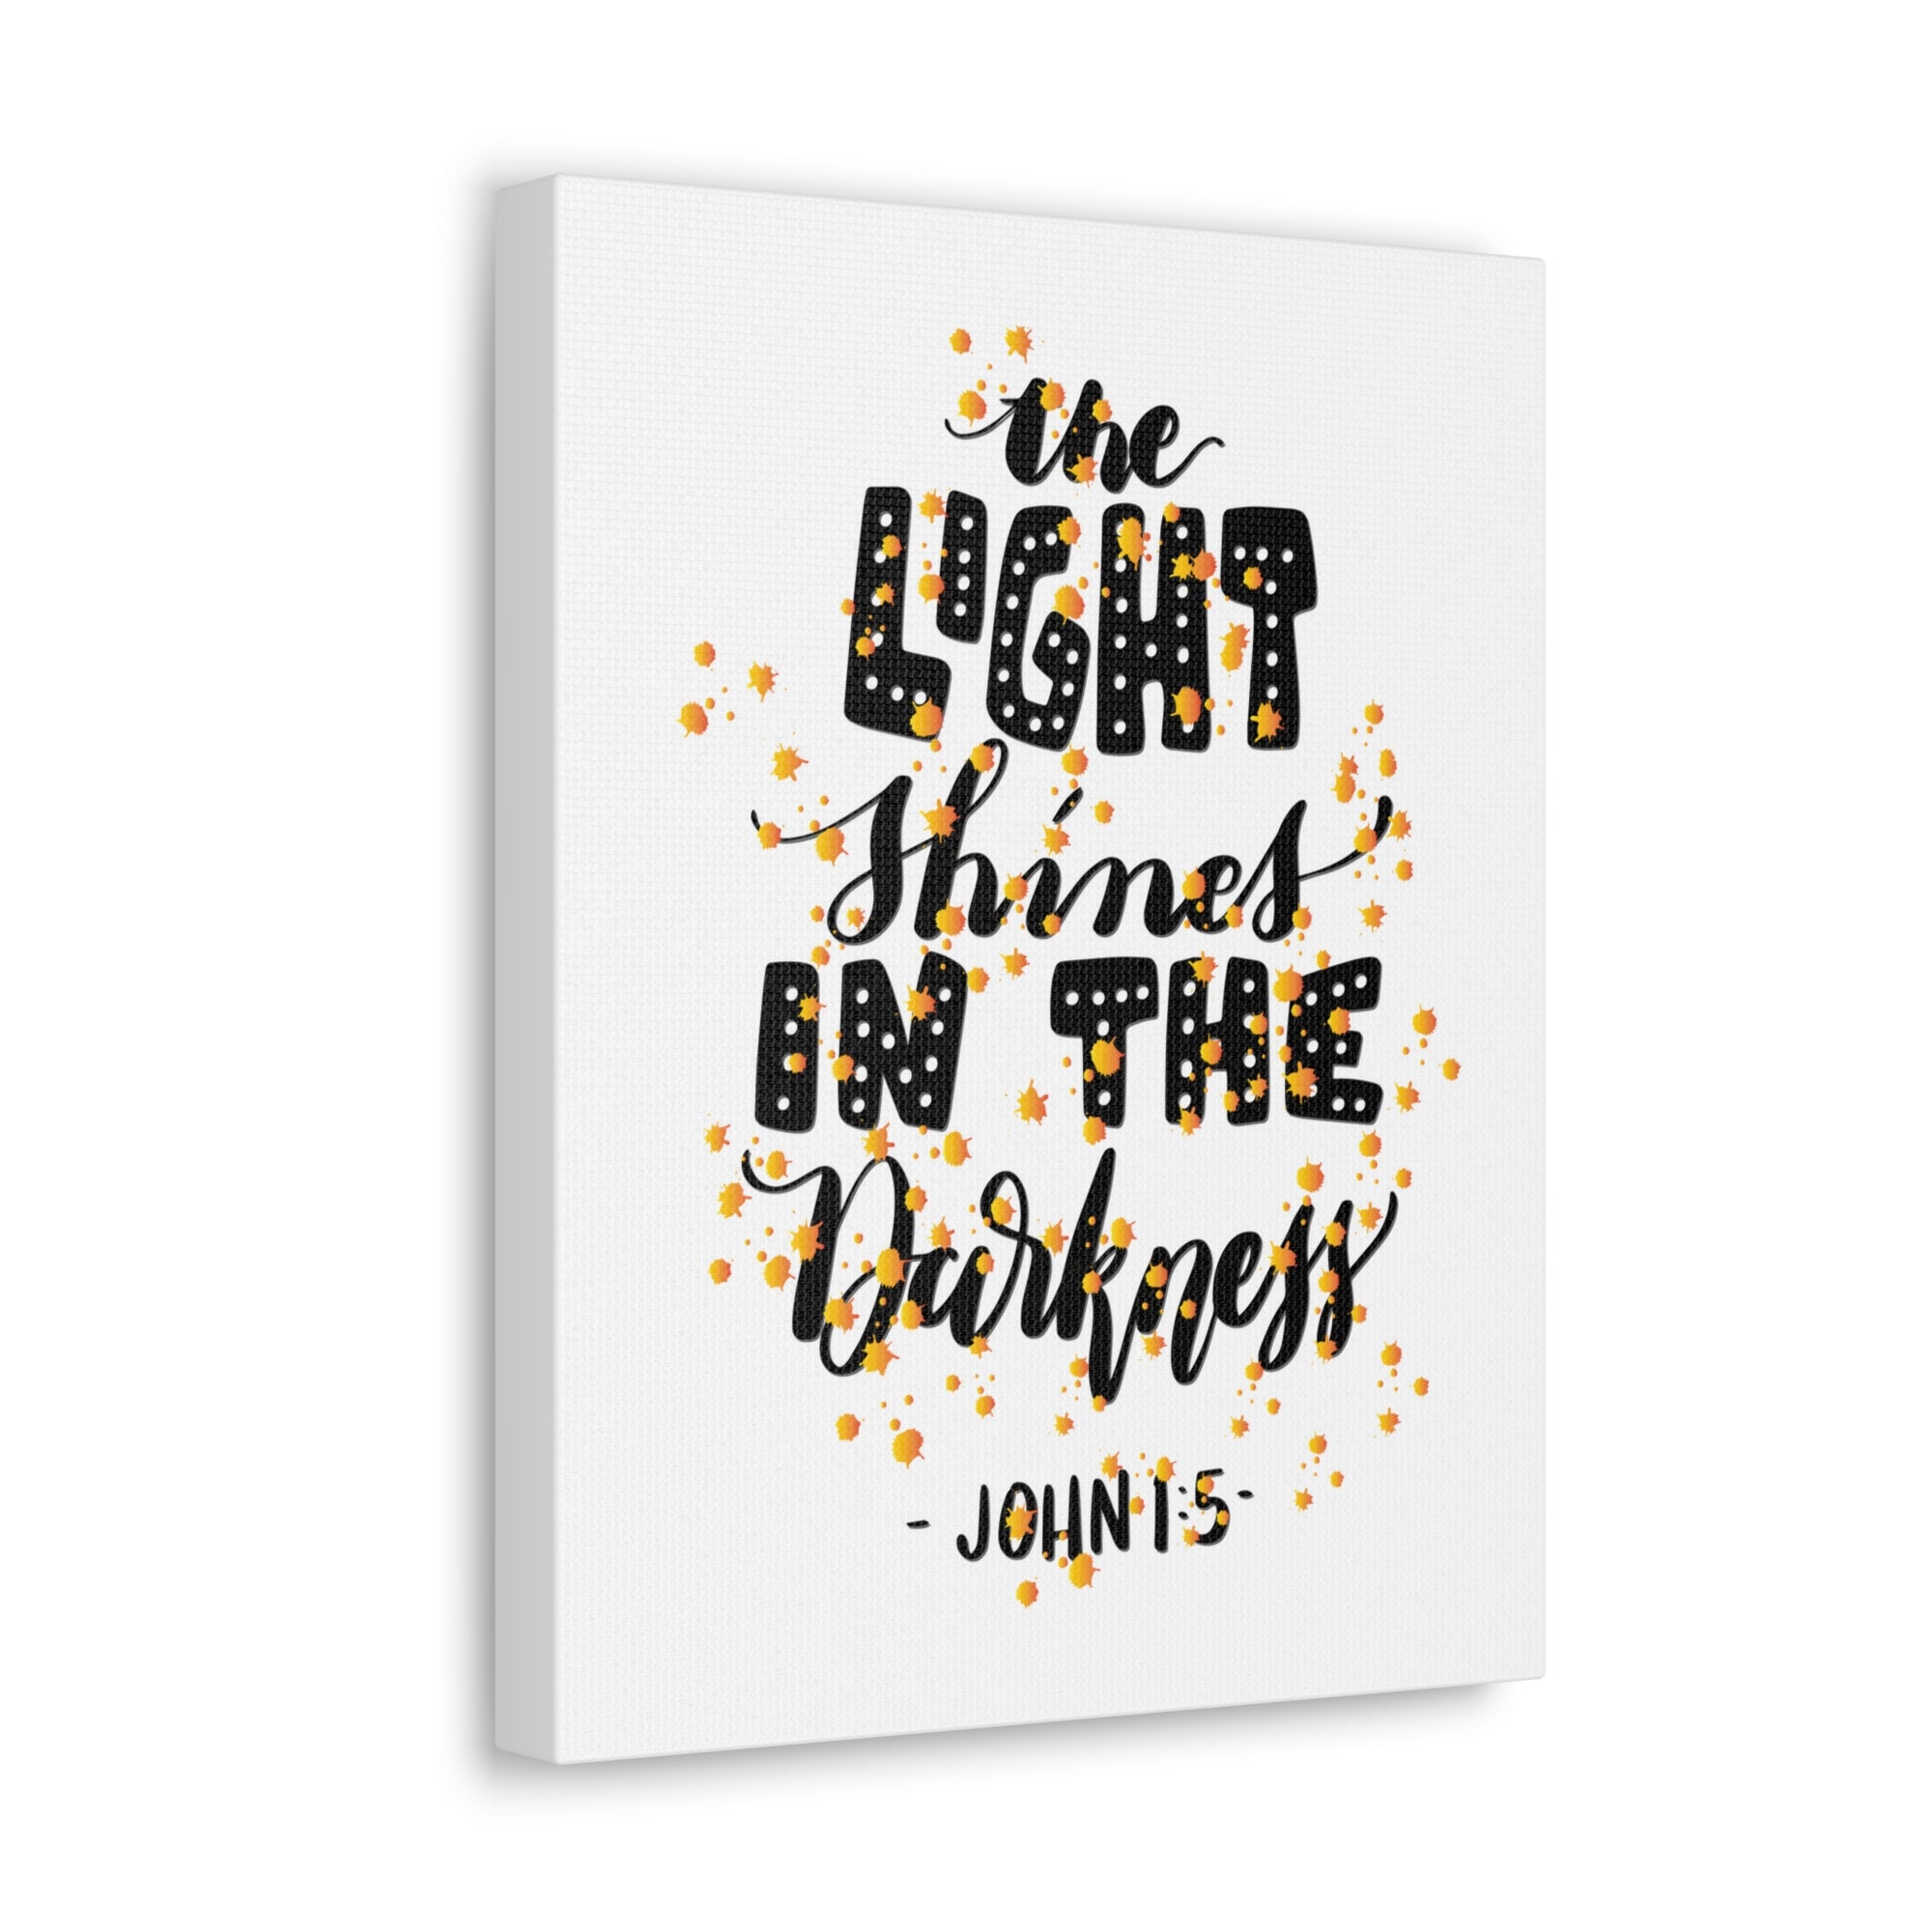 Scripture Walls The Light Shines John 1:5 Bible Verse Canvas Christian Wall Art Ready to Hang-Express Your Love Gifts